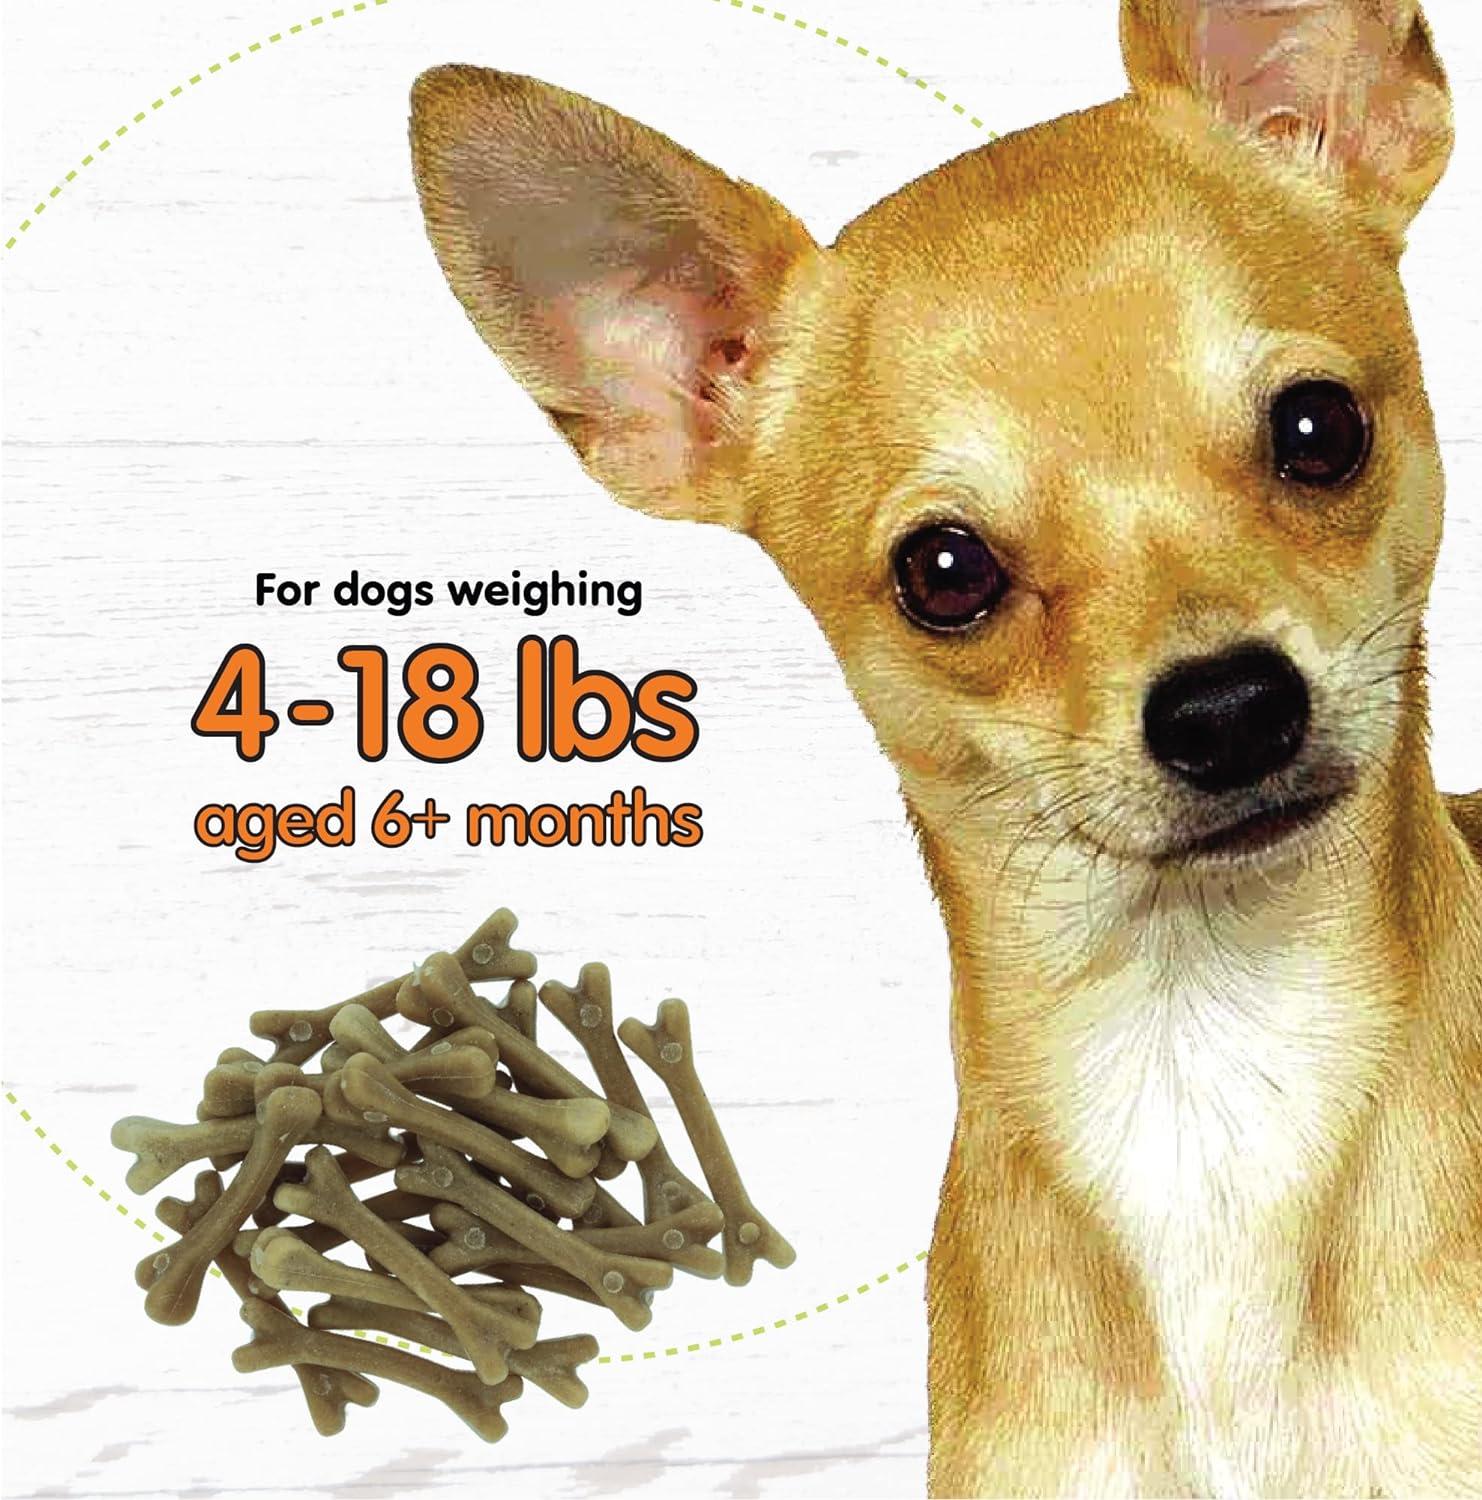 FIDO NATURALS Super Breath Dental Care Bones for Dogs - 100 Count Mini Dog Dental Treats for Extra Small Dogs, Made in USA, Tasty Dog Dental Chews Help Reduce Plaque, Tartar Buildup & Freshens Breath : Pet Supplies